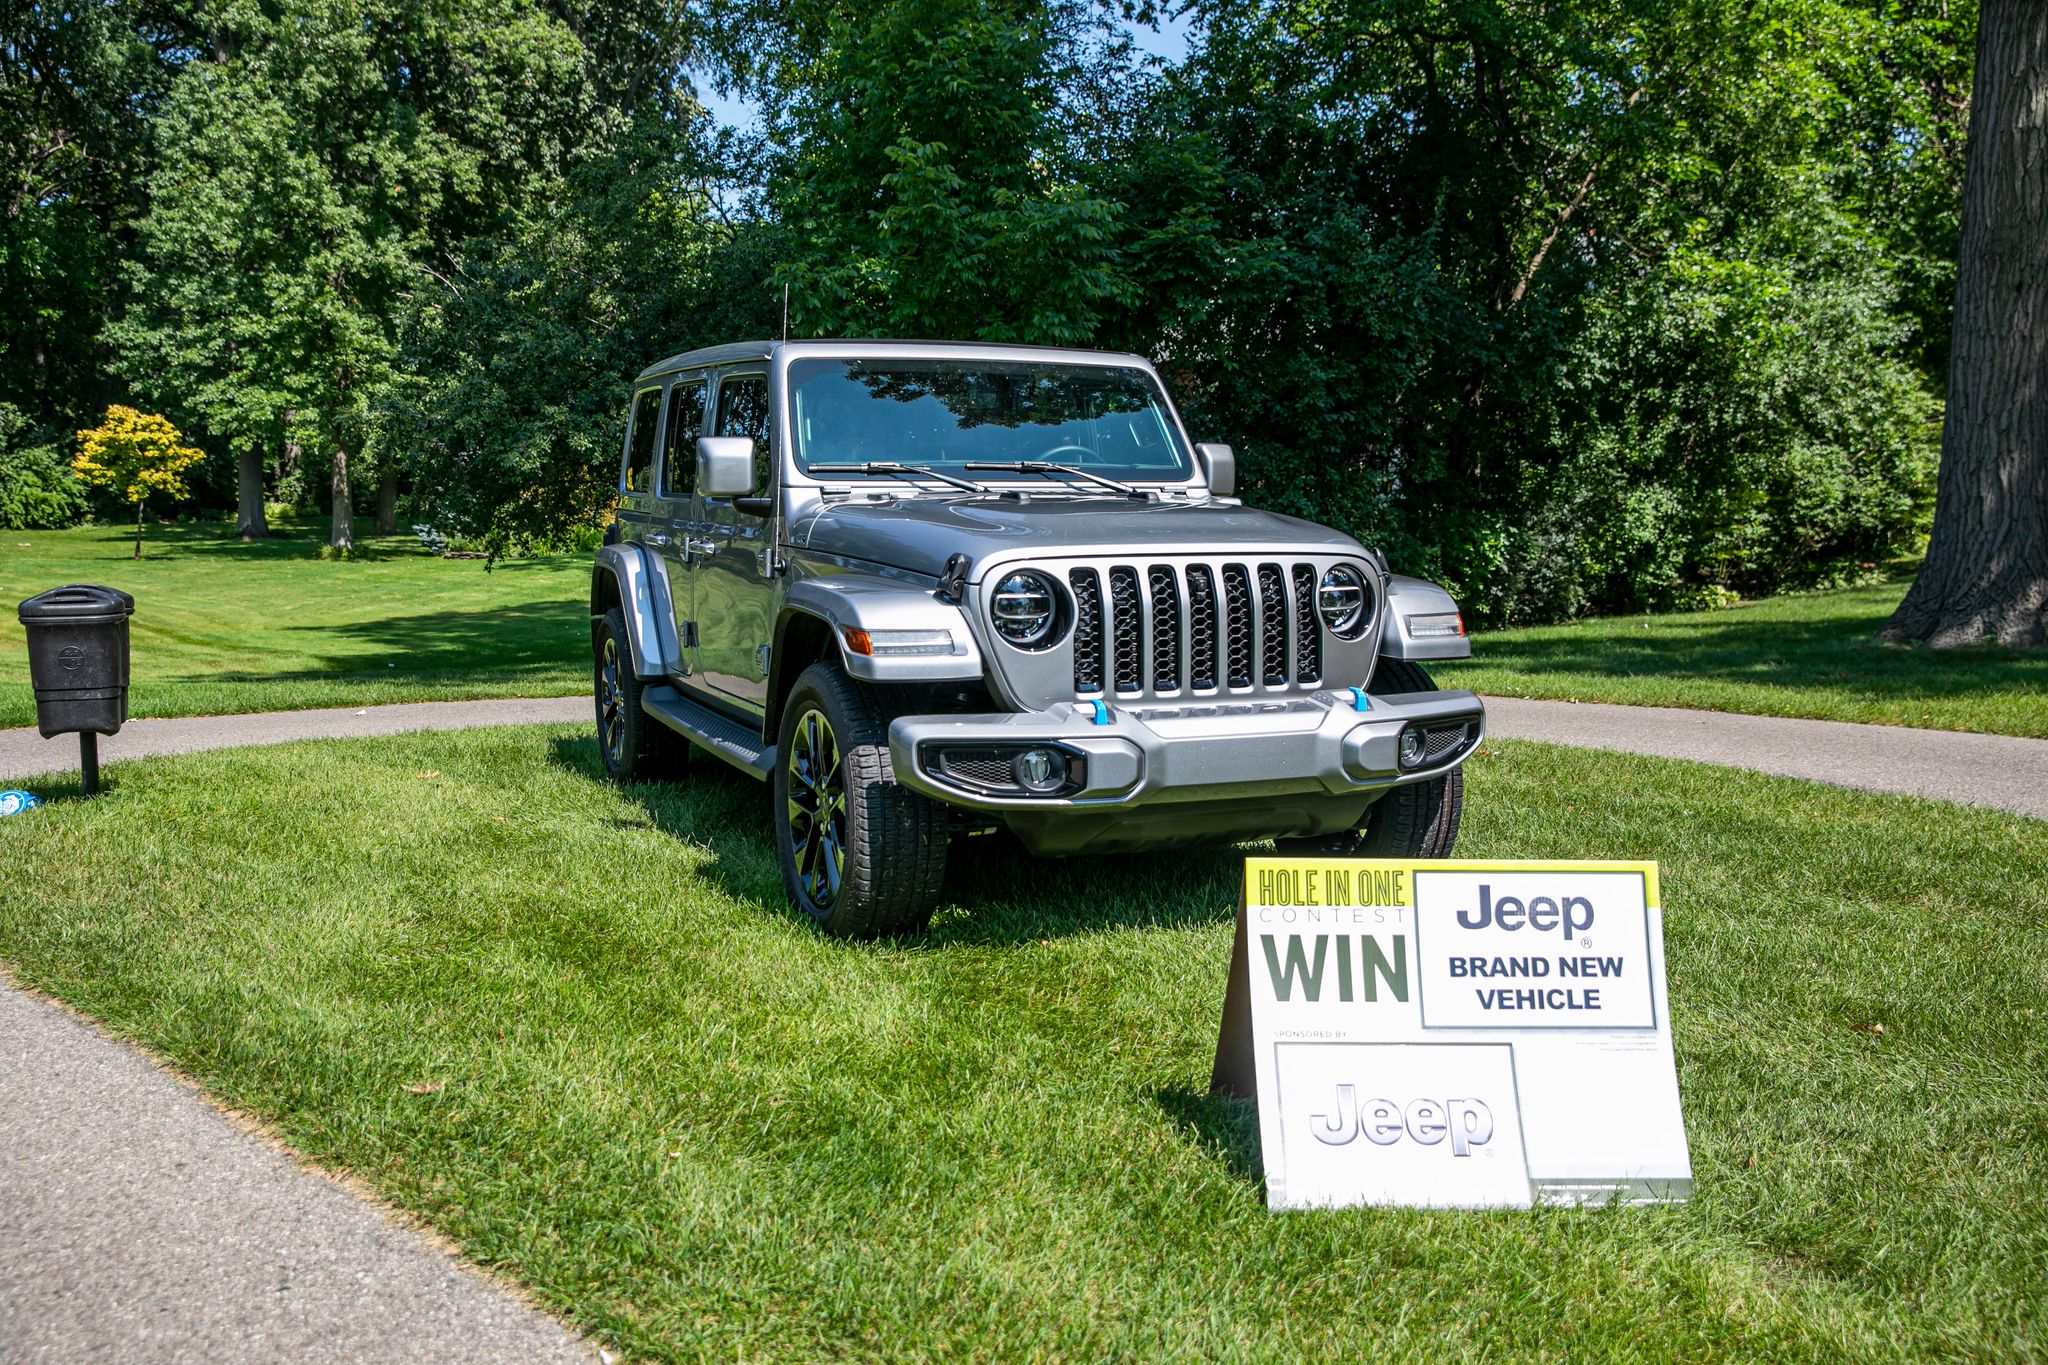 The Hole-In-One JEEP Commander at the 11th annual Jalen Rose Golf Classic, A PGD Global Production at Detroit Golf Club.